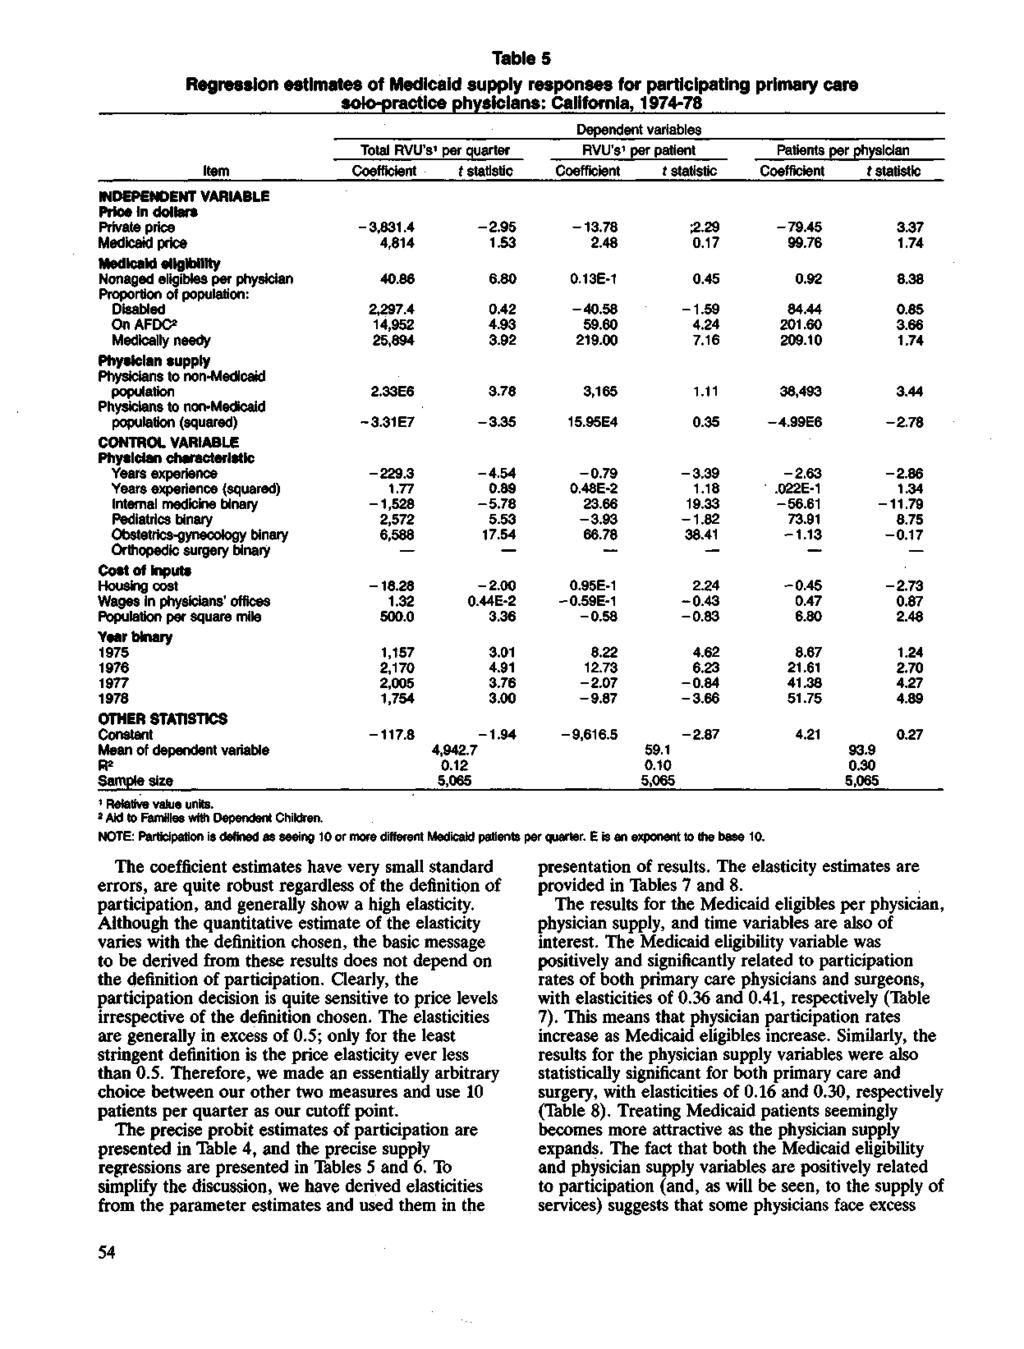 Table 5 Regression estimates of Medicaid supply responses for participating primary care solo-practice physicians: California, 1974-78 Dependent variables Total RVU's 1 per quarter RVU's 1 per